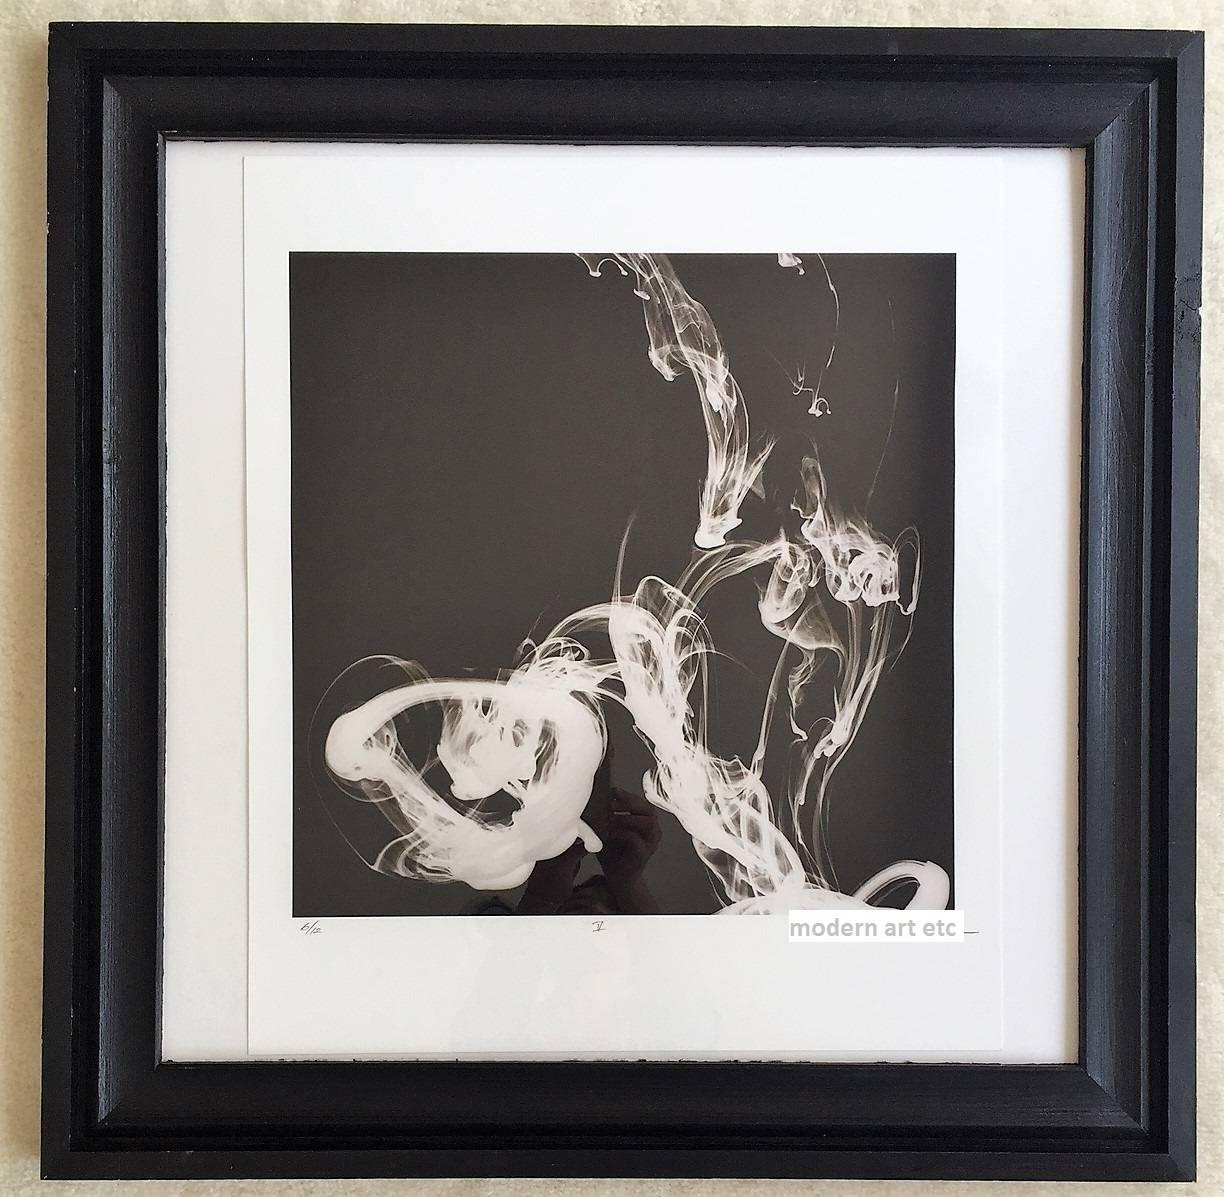 MAE Curates Abstract Photograph - Abstract art photography in black and white - framed in custom made wood frame